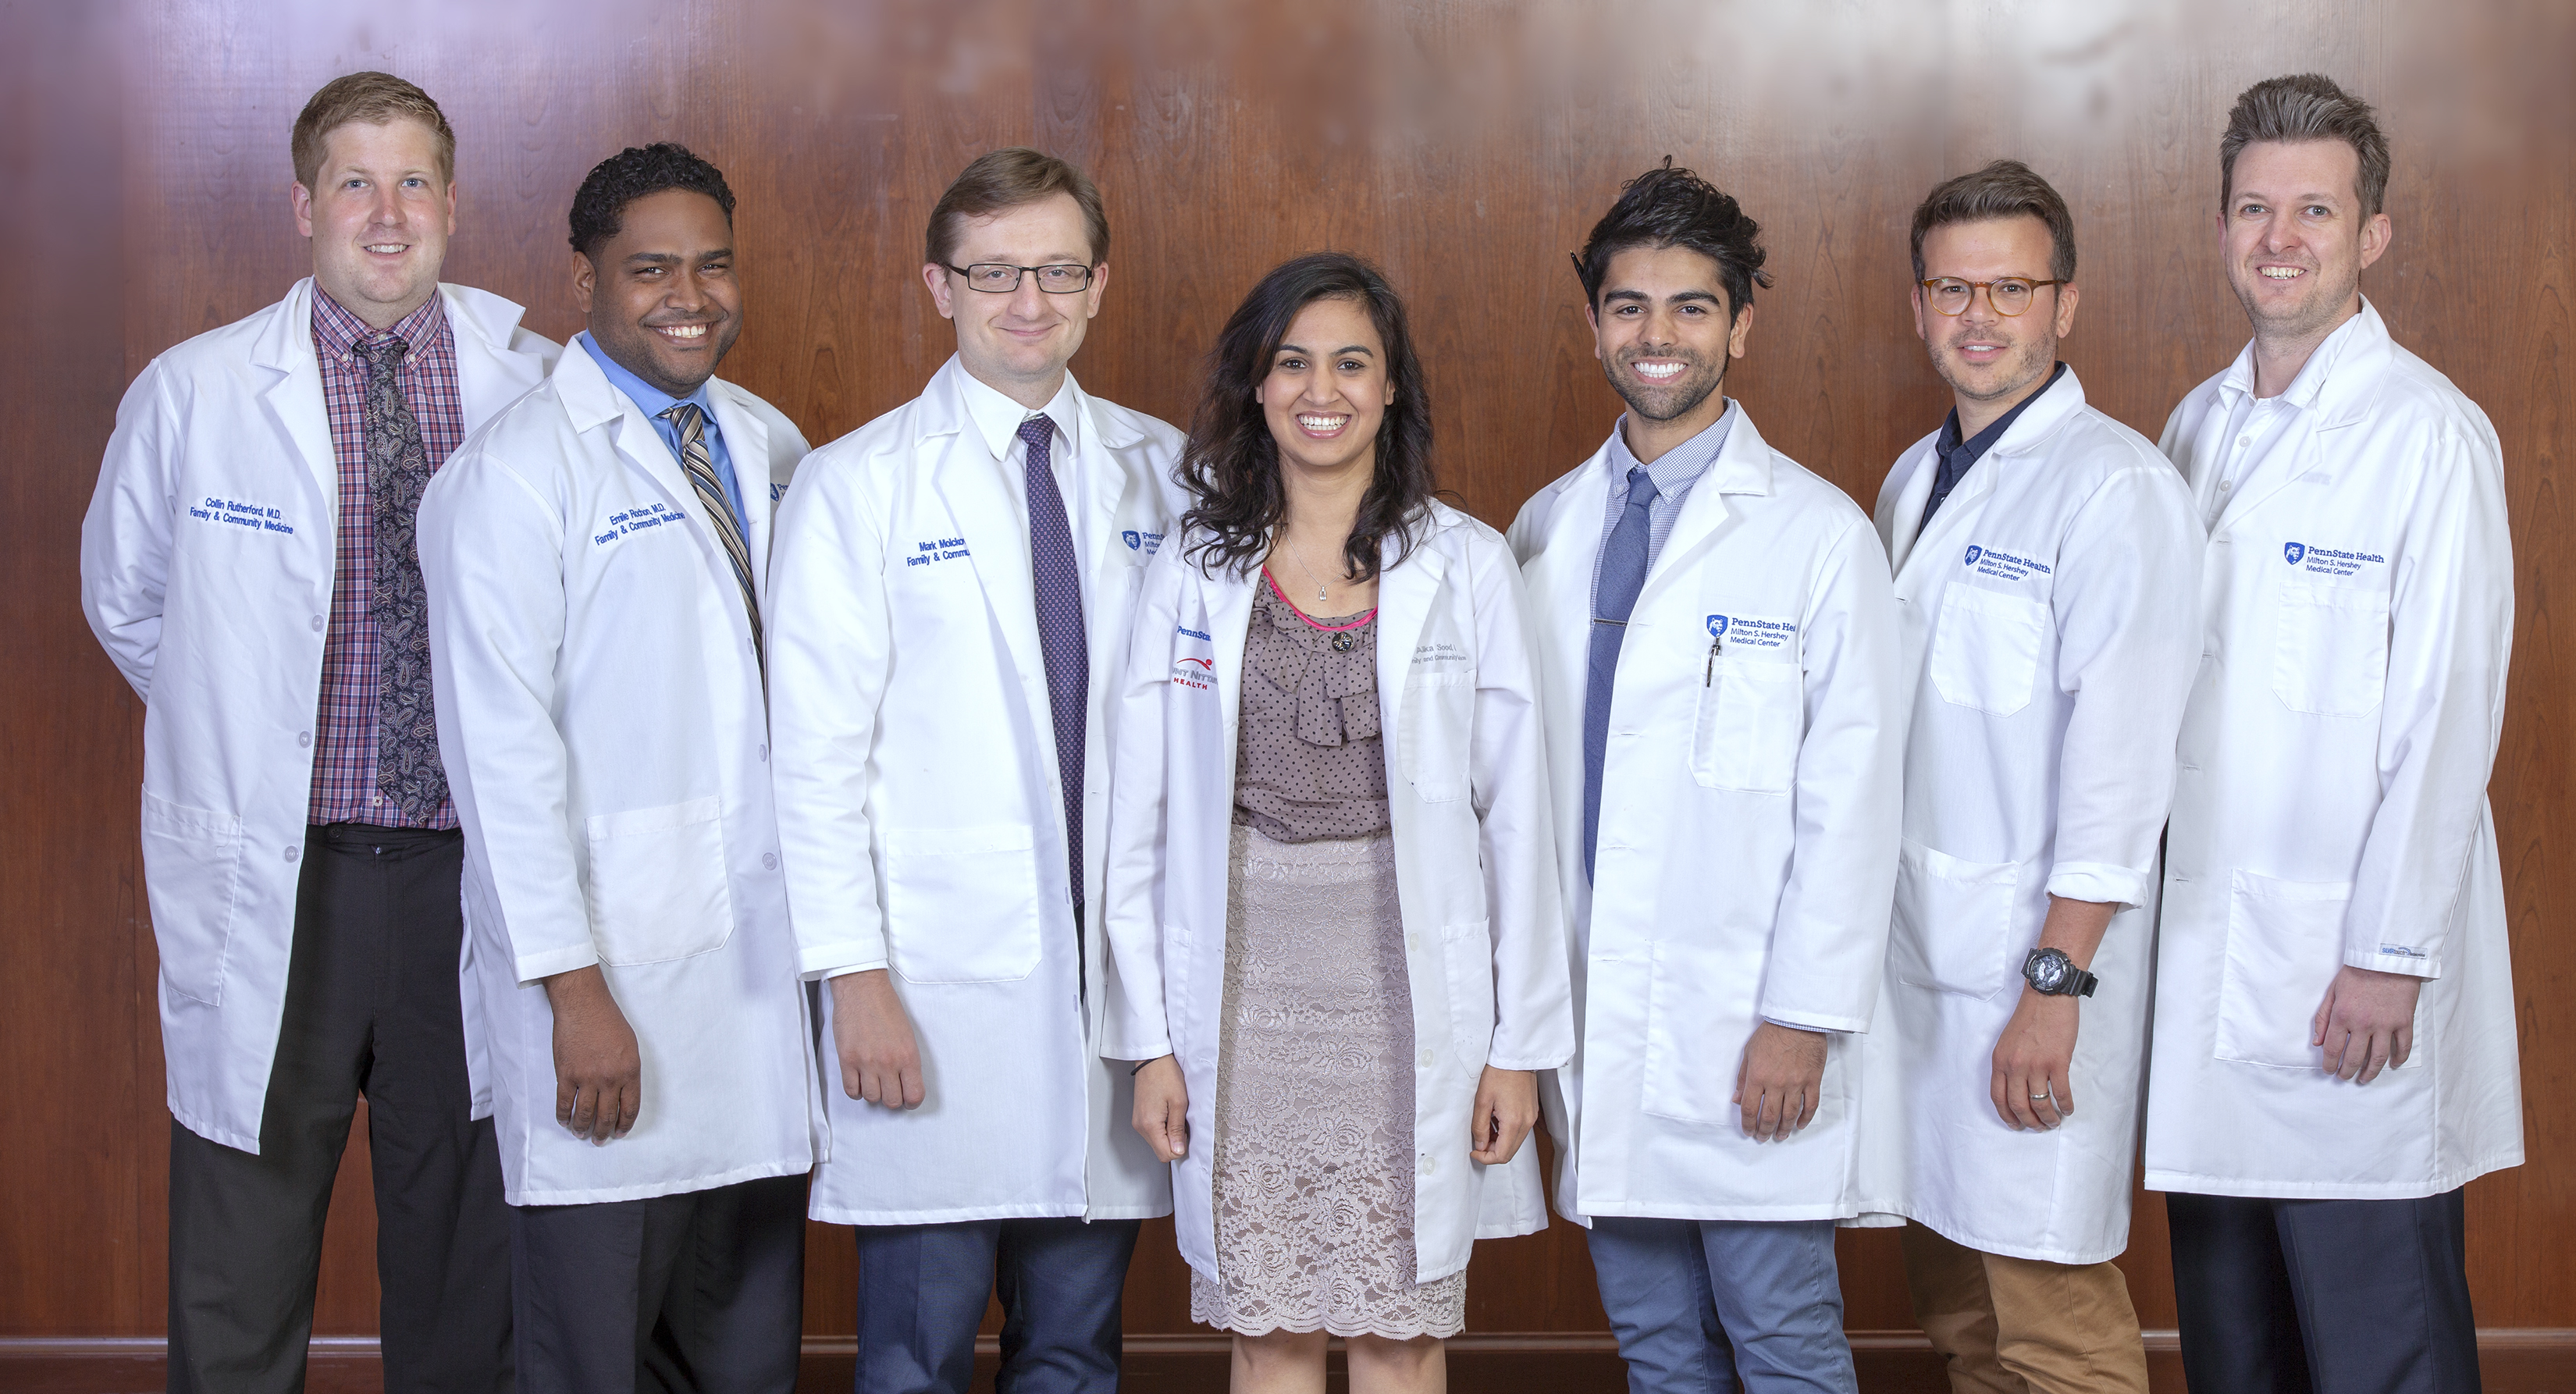 Six men and one woman wearing white lab coats with the Hershey Medical Center logo and their names on them stand in a row and smile. The men are wearing shirts and ties, and the woman is wearing a skirt and top. The wall behind them is made of wood paneling.